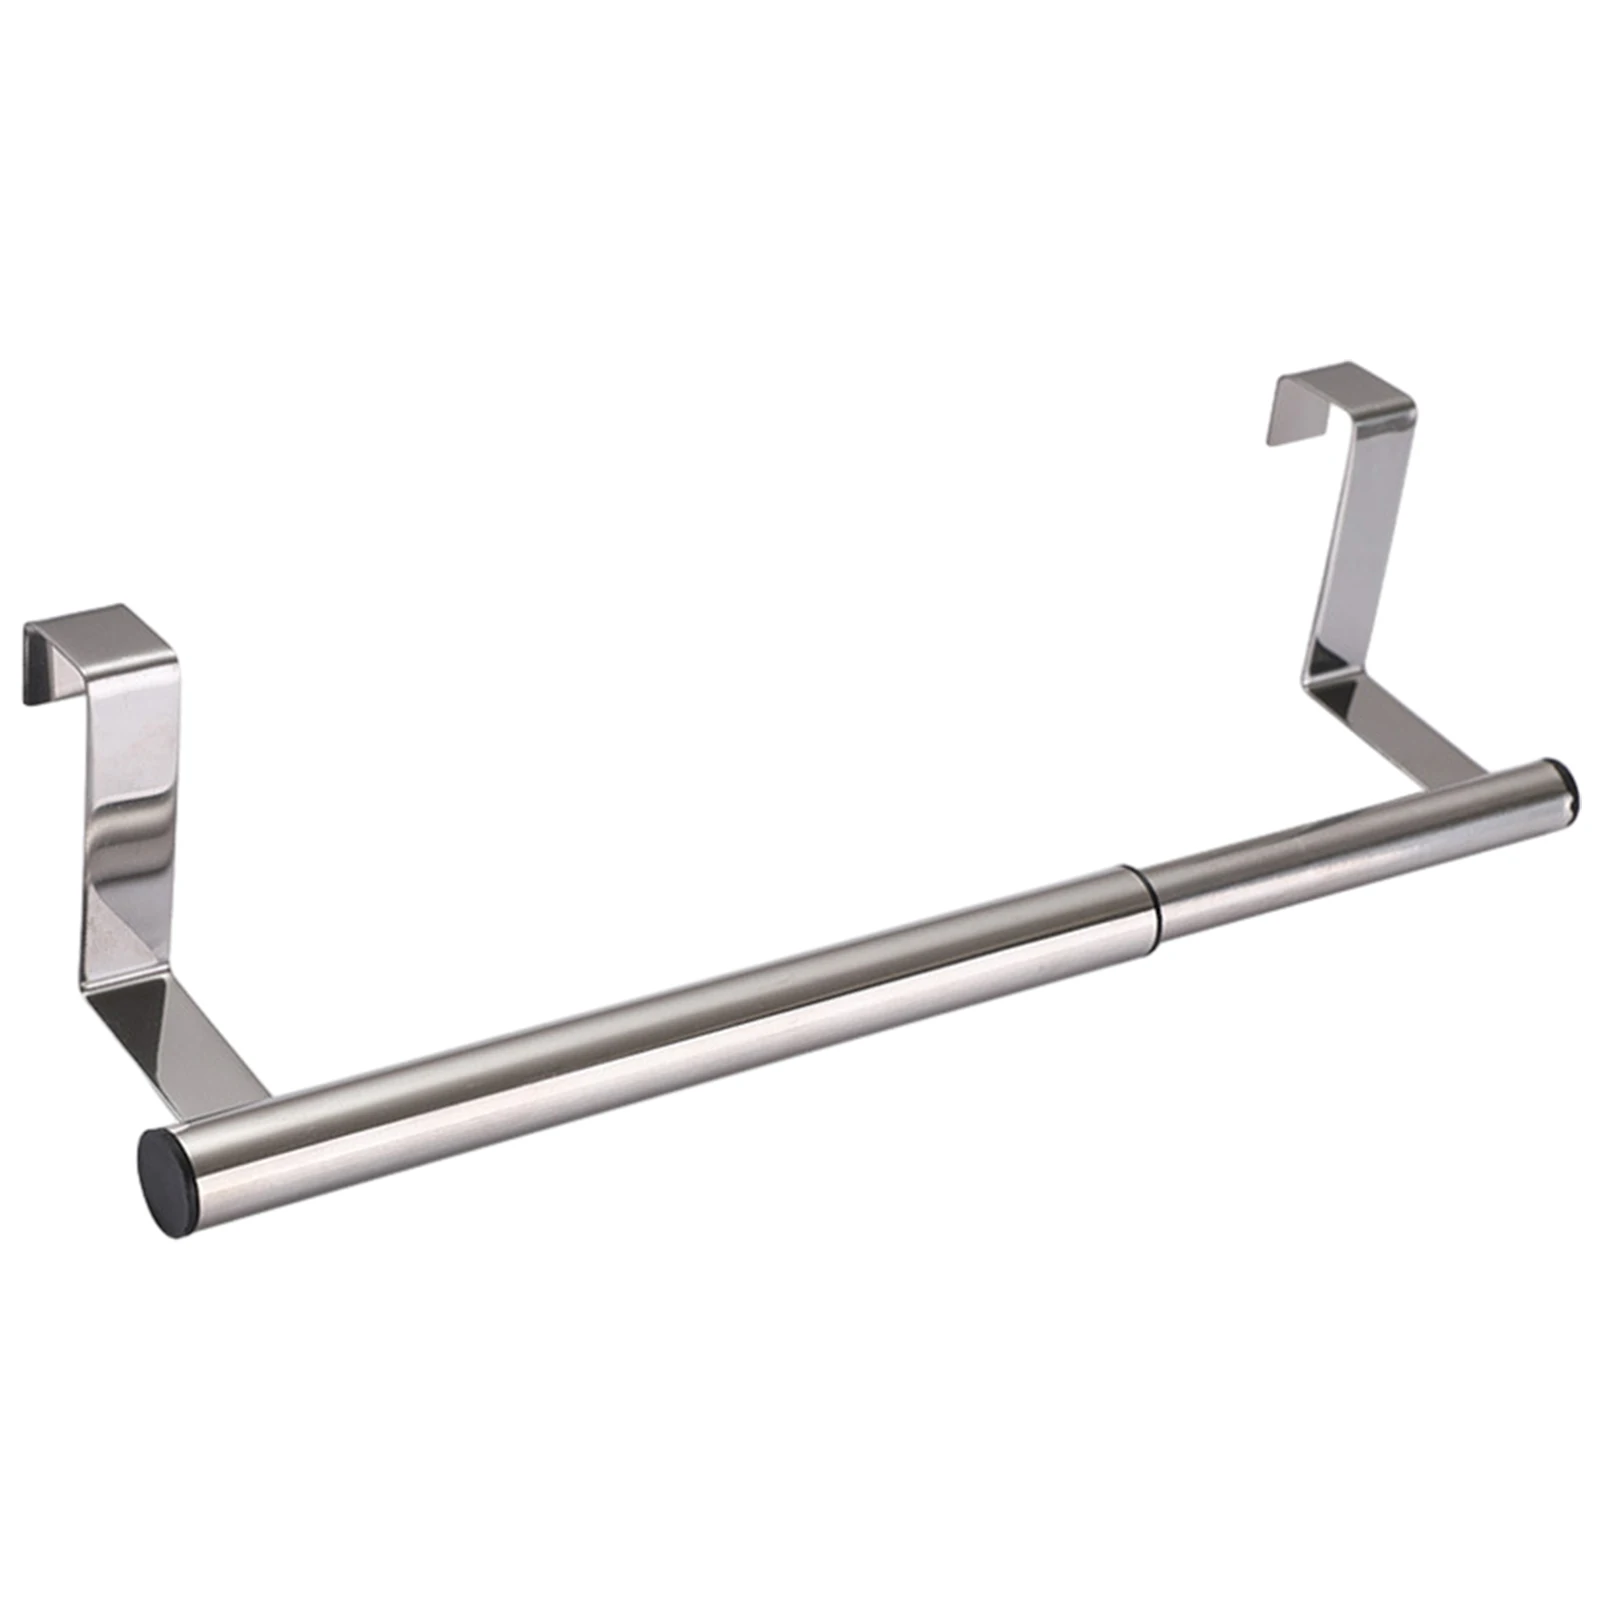 Holder No Drilling For Hanging Cupboard Universal Storage Stable Saving Space Stainless Steel